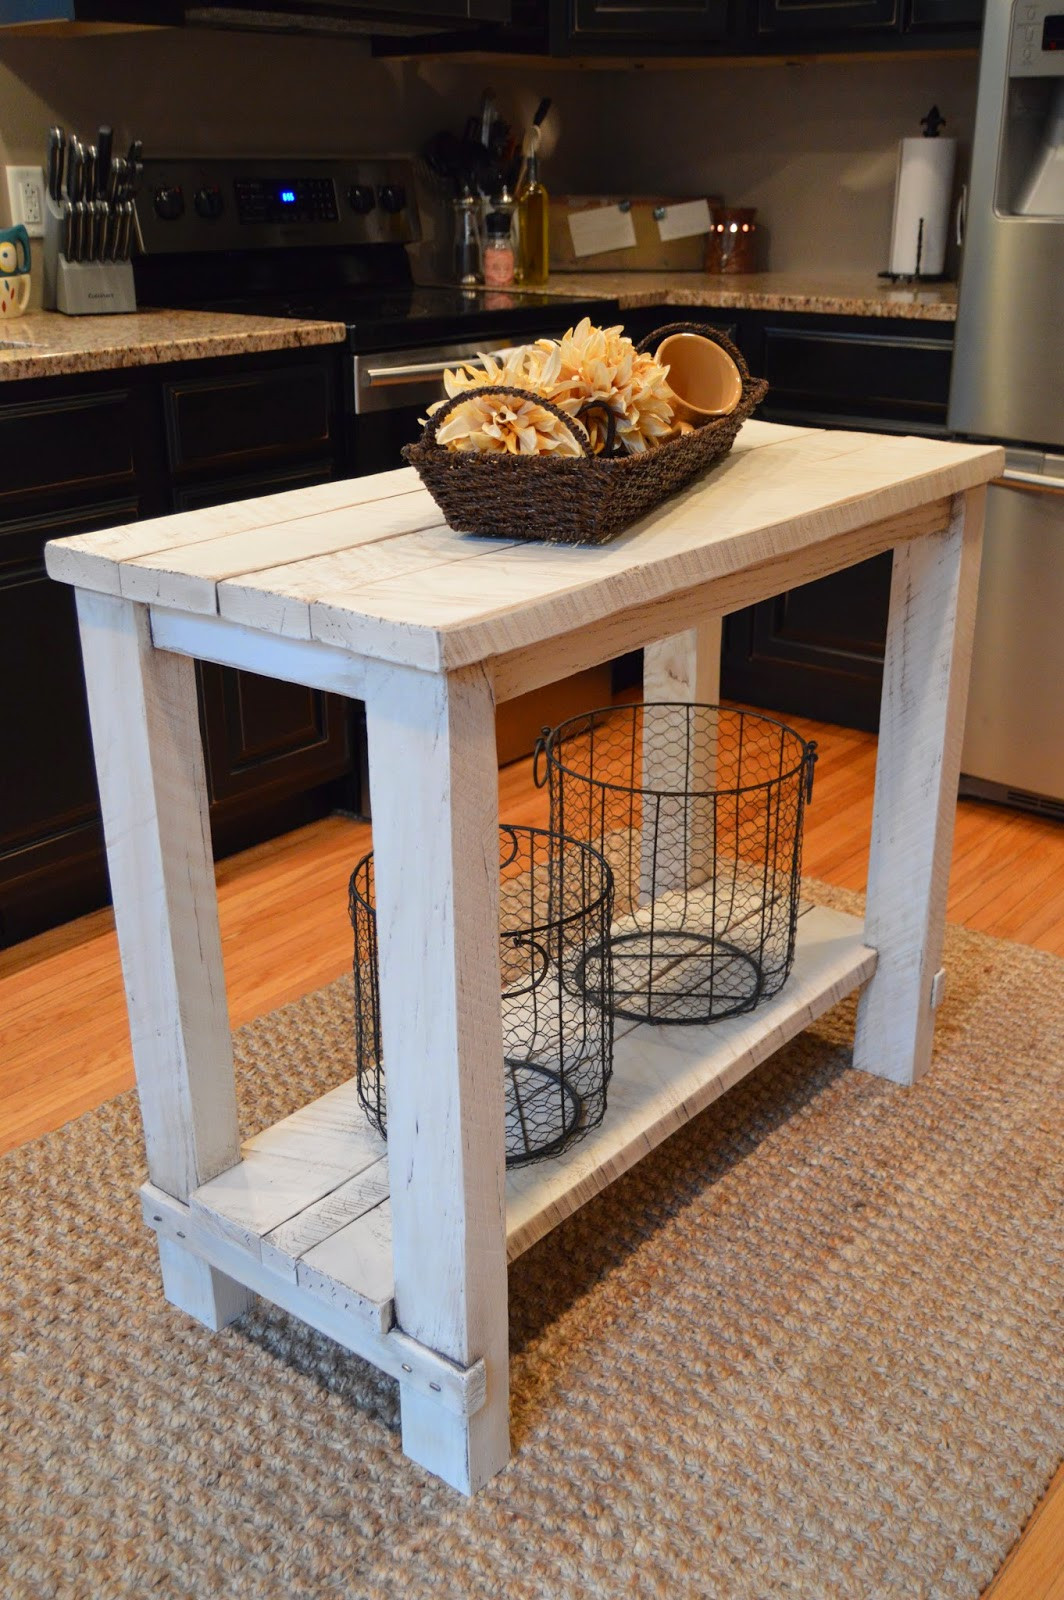 Rustic Wood Kitchen Island
 15 Gorgeous DIY Kitchen Islands For Every Bud